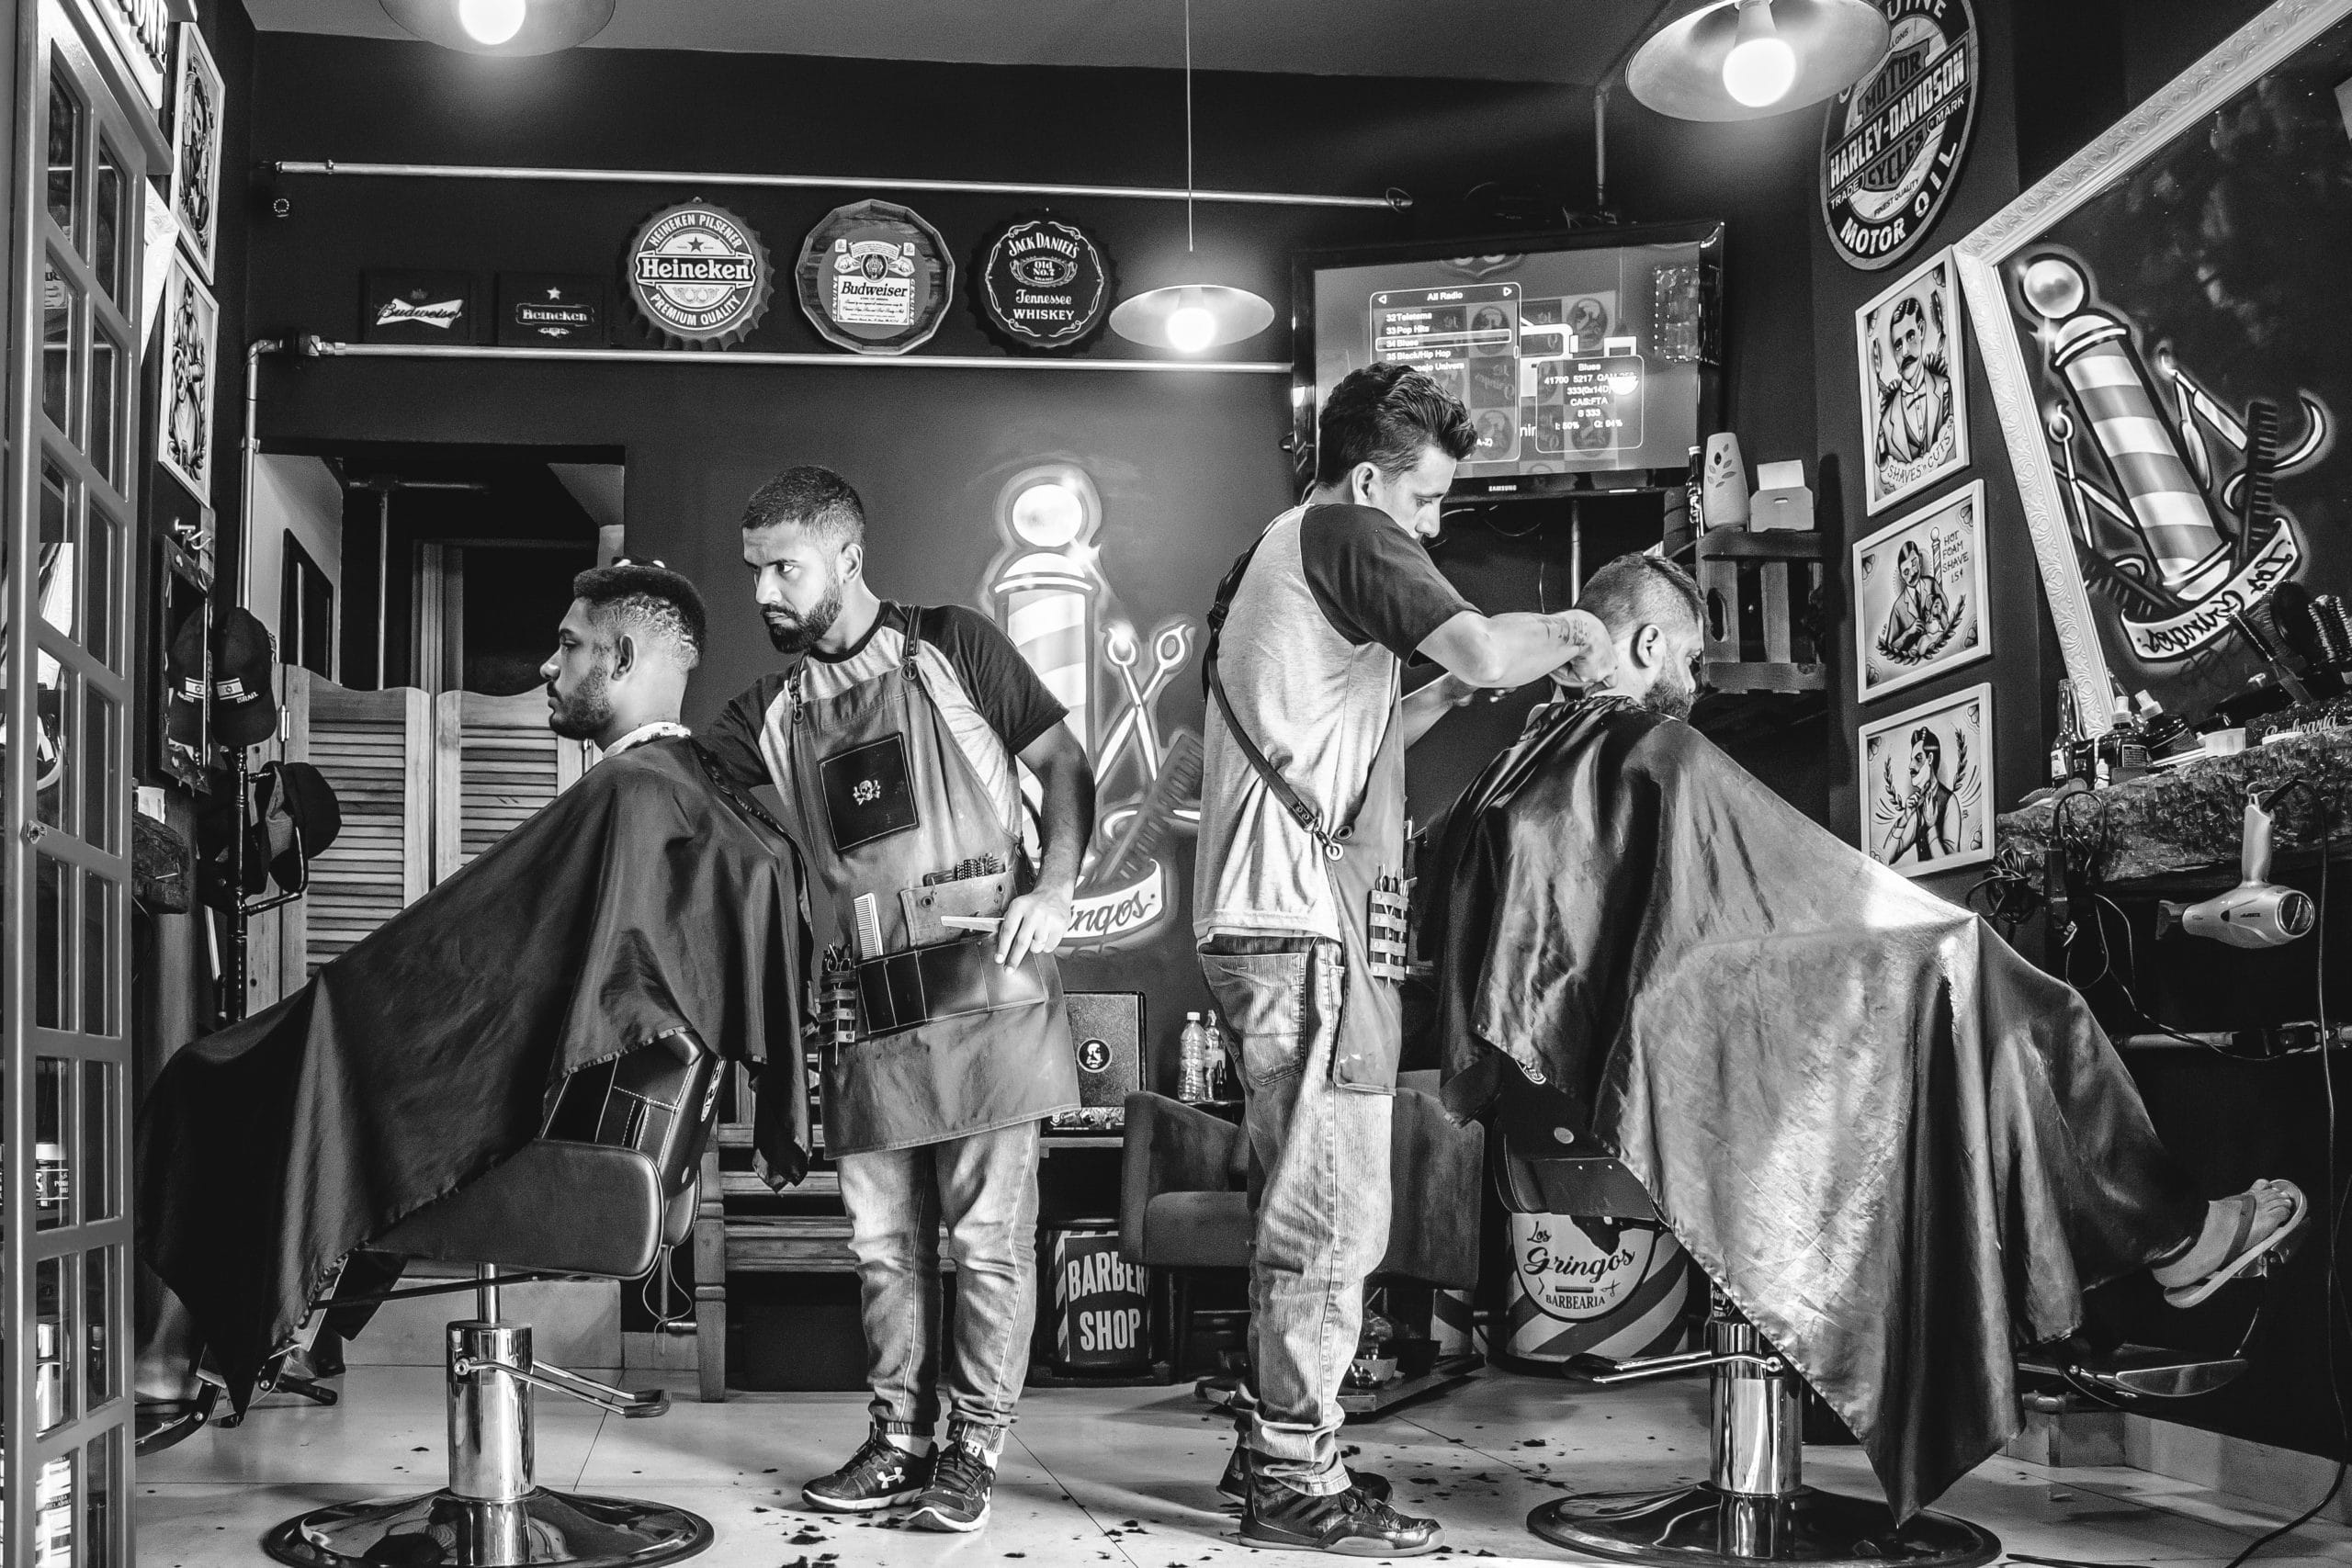 A well promoted barber shop in oman where men get their haircuts